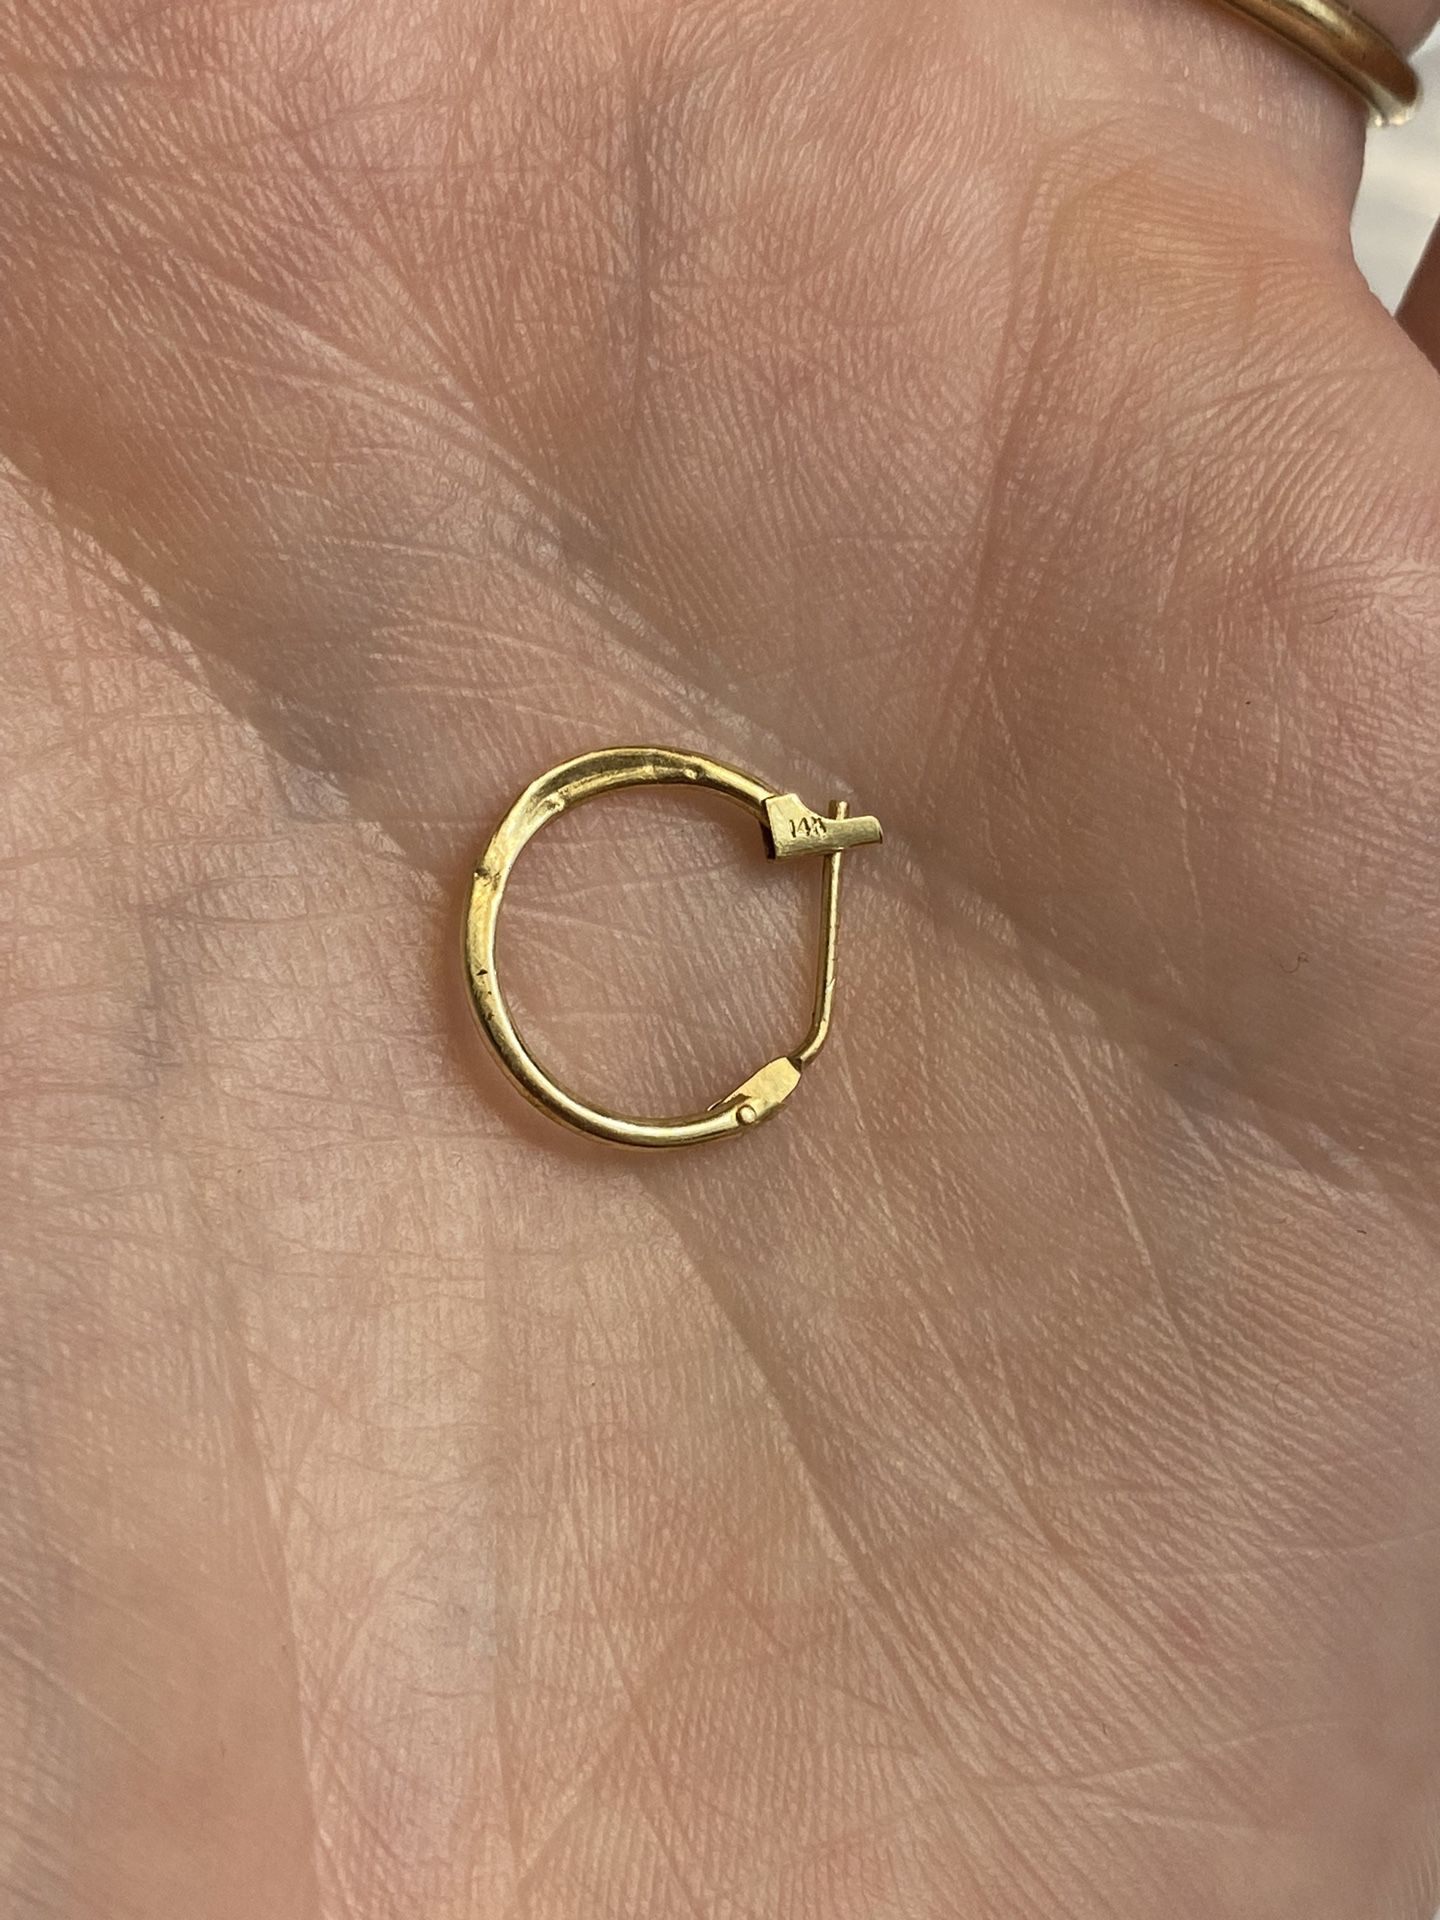 Found 14k Stamped Gold Small Hoop Earring To Use For Scrap Metal -$5